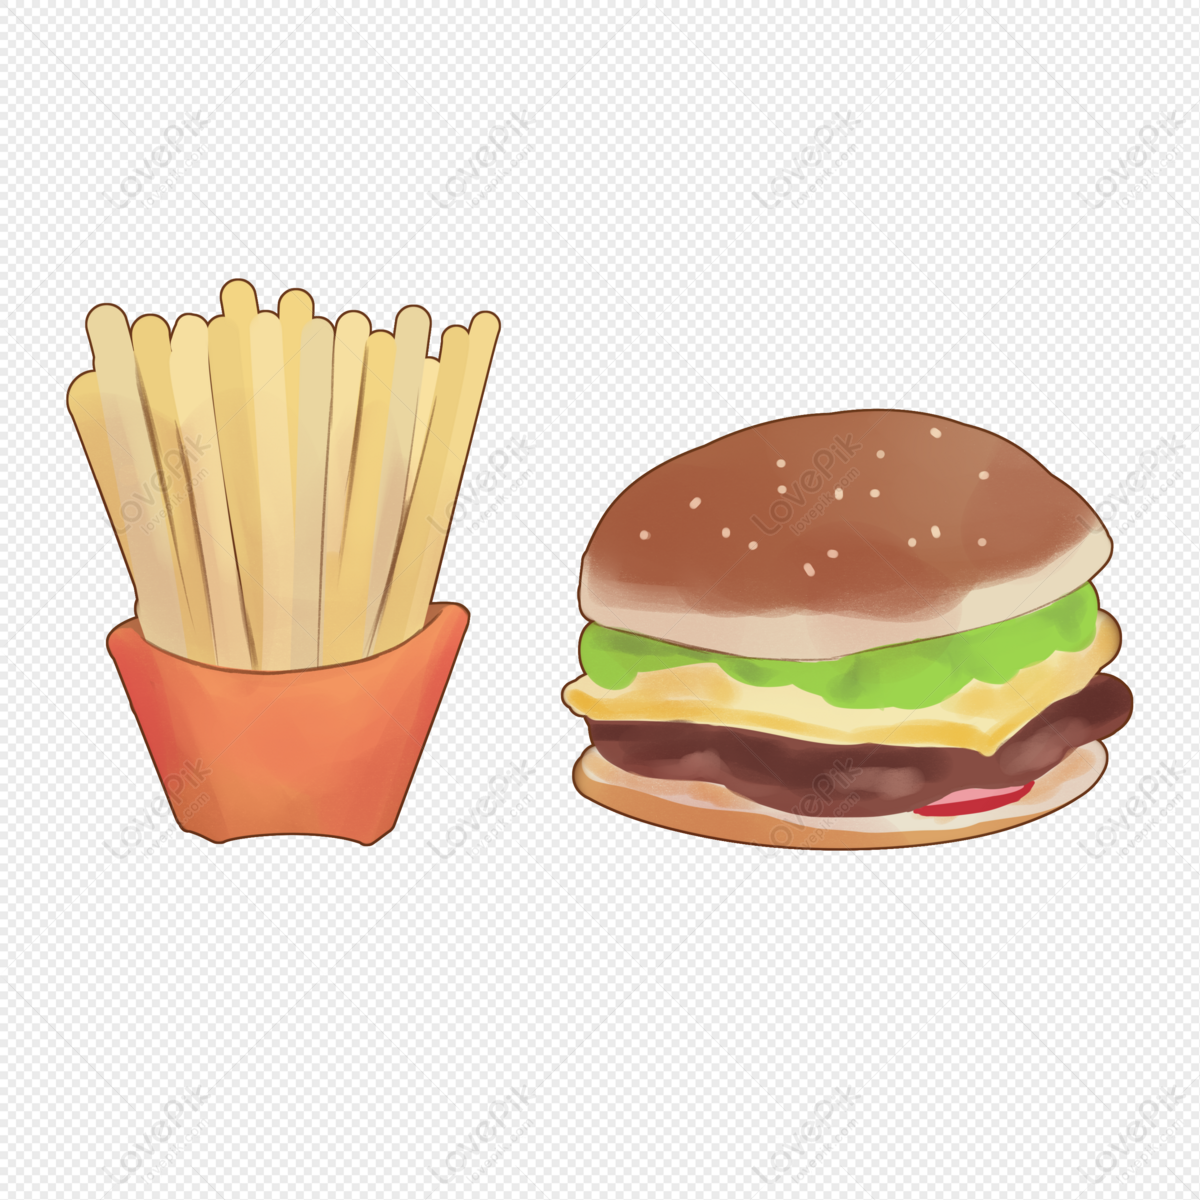 free clipart with burgers and fries